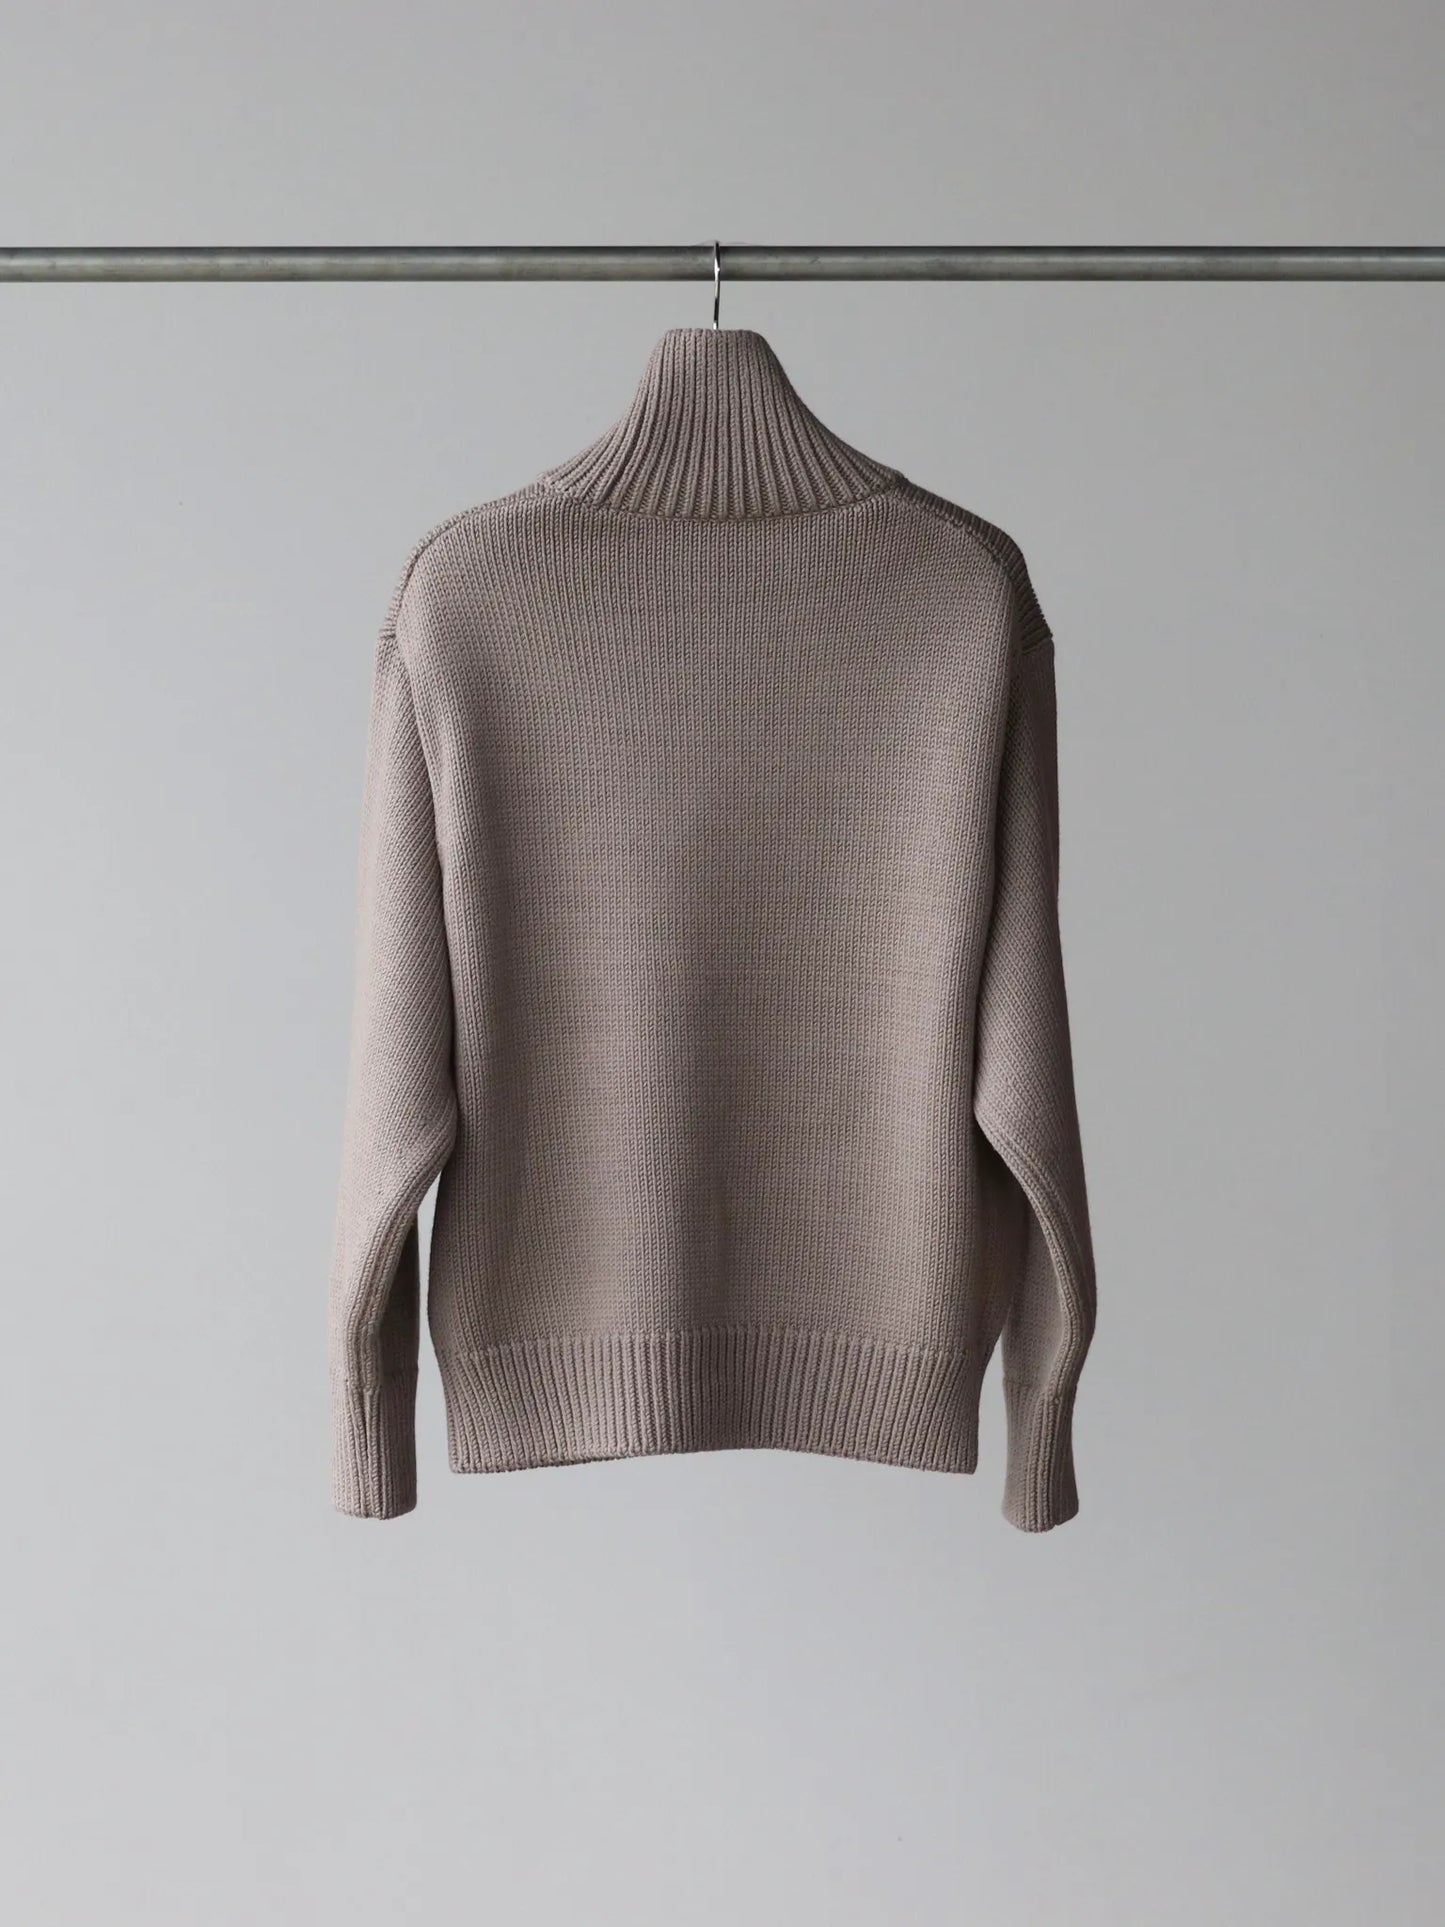 olde-h-daughter-wool-turtle-neck-p-o-duskee-4